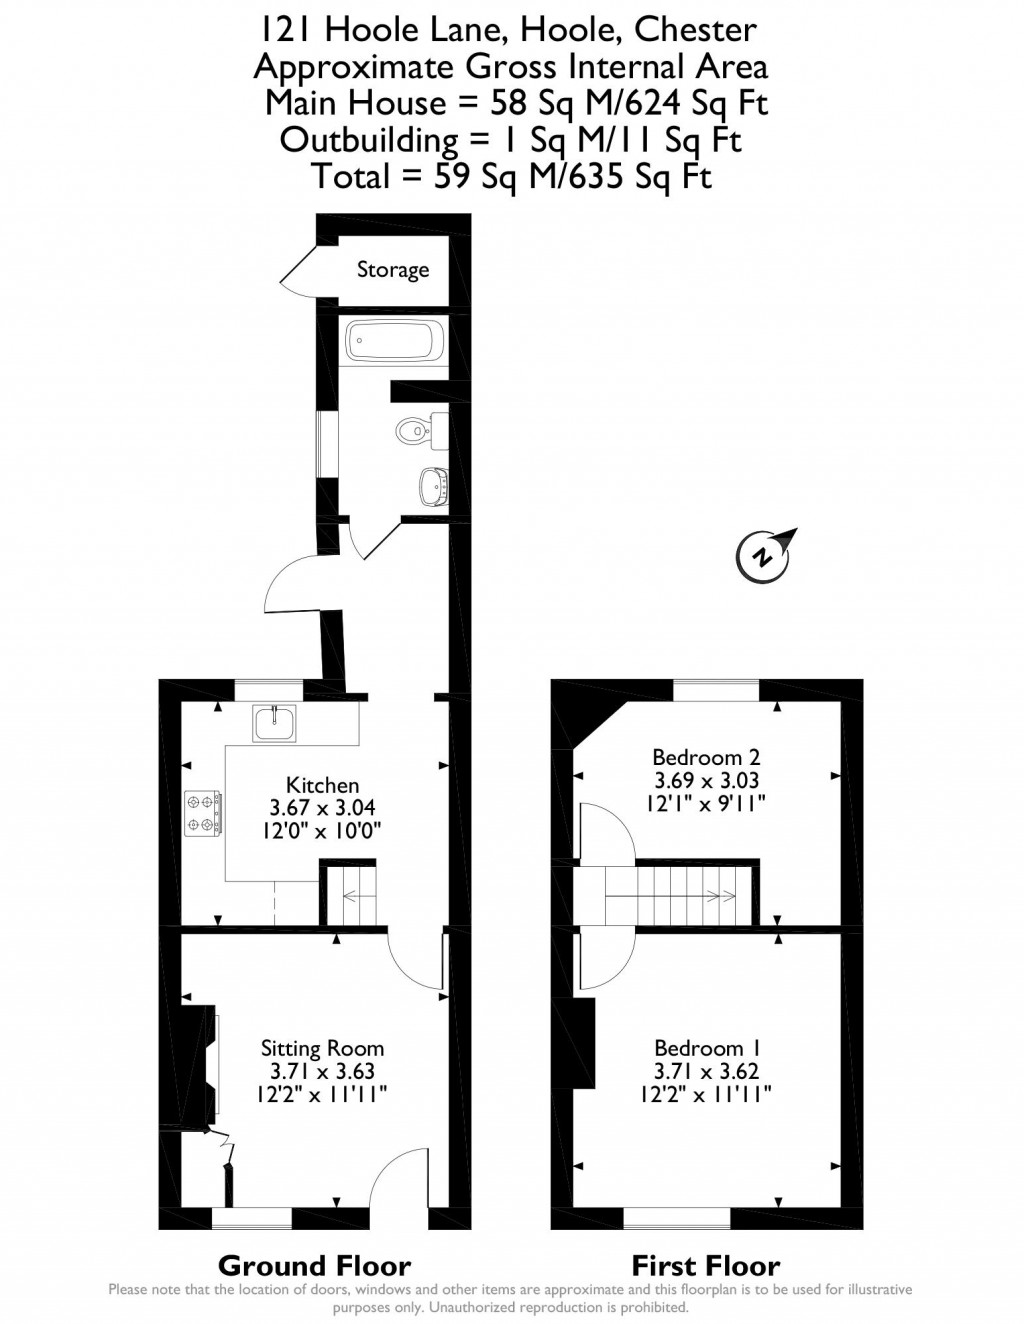 Floorplans For Hoole, Chester